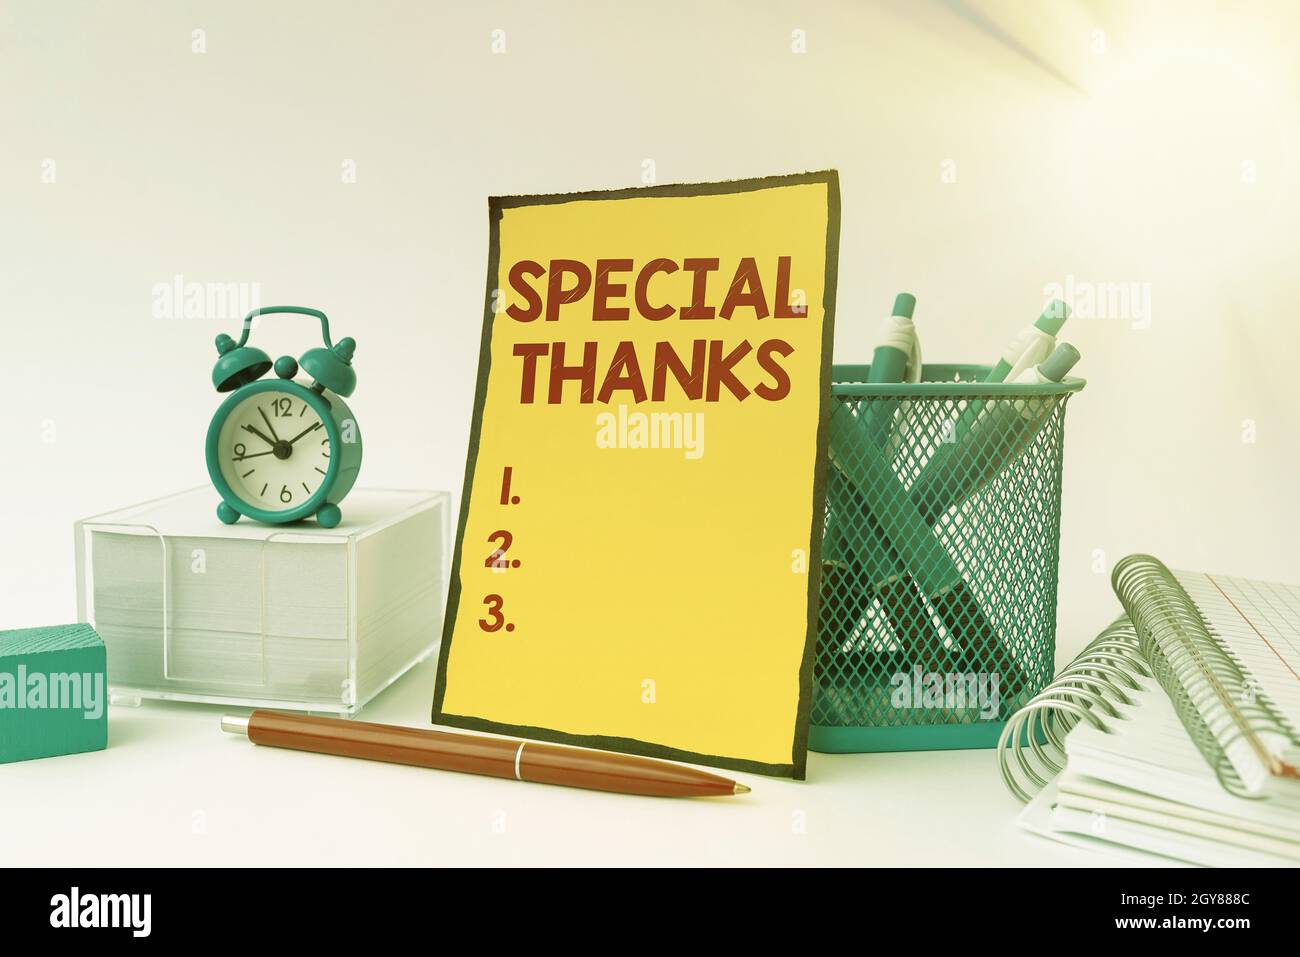 Text sign showing Special Thanks, Internet Concept appreciating something or someone in a most unique way Tidy Workspace Setup Writing Desk Tools And Stock Photo